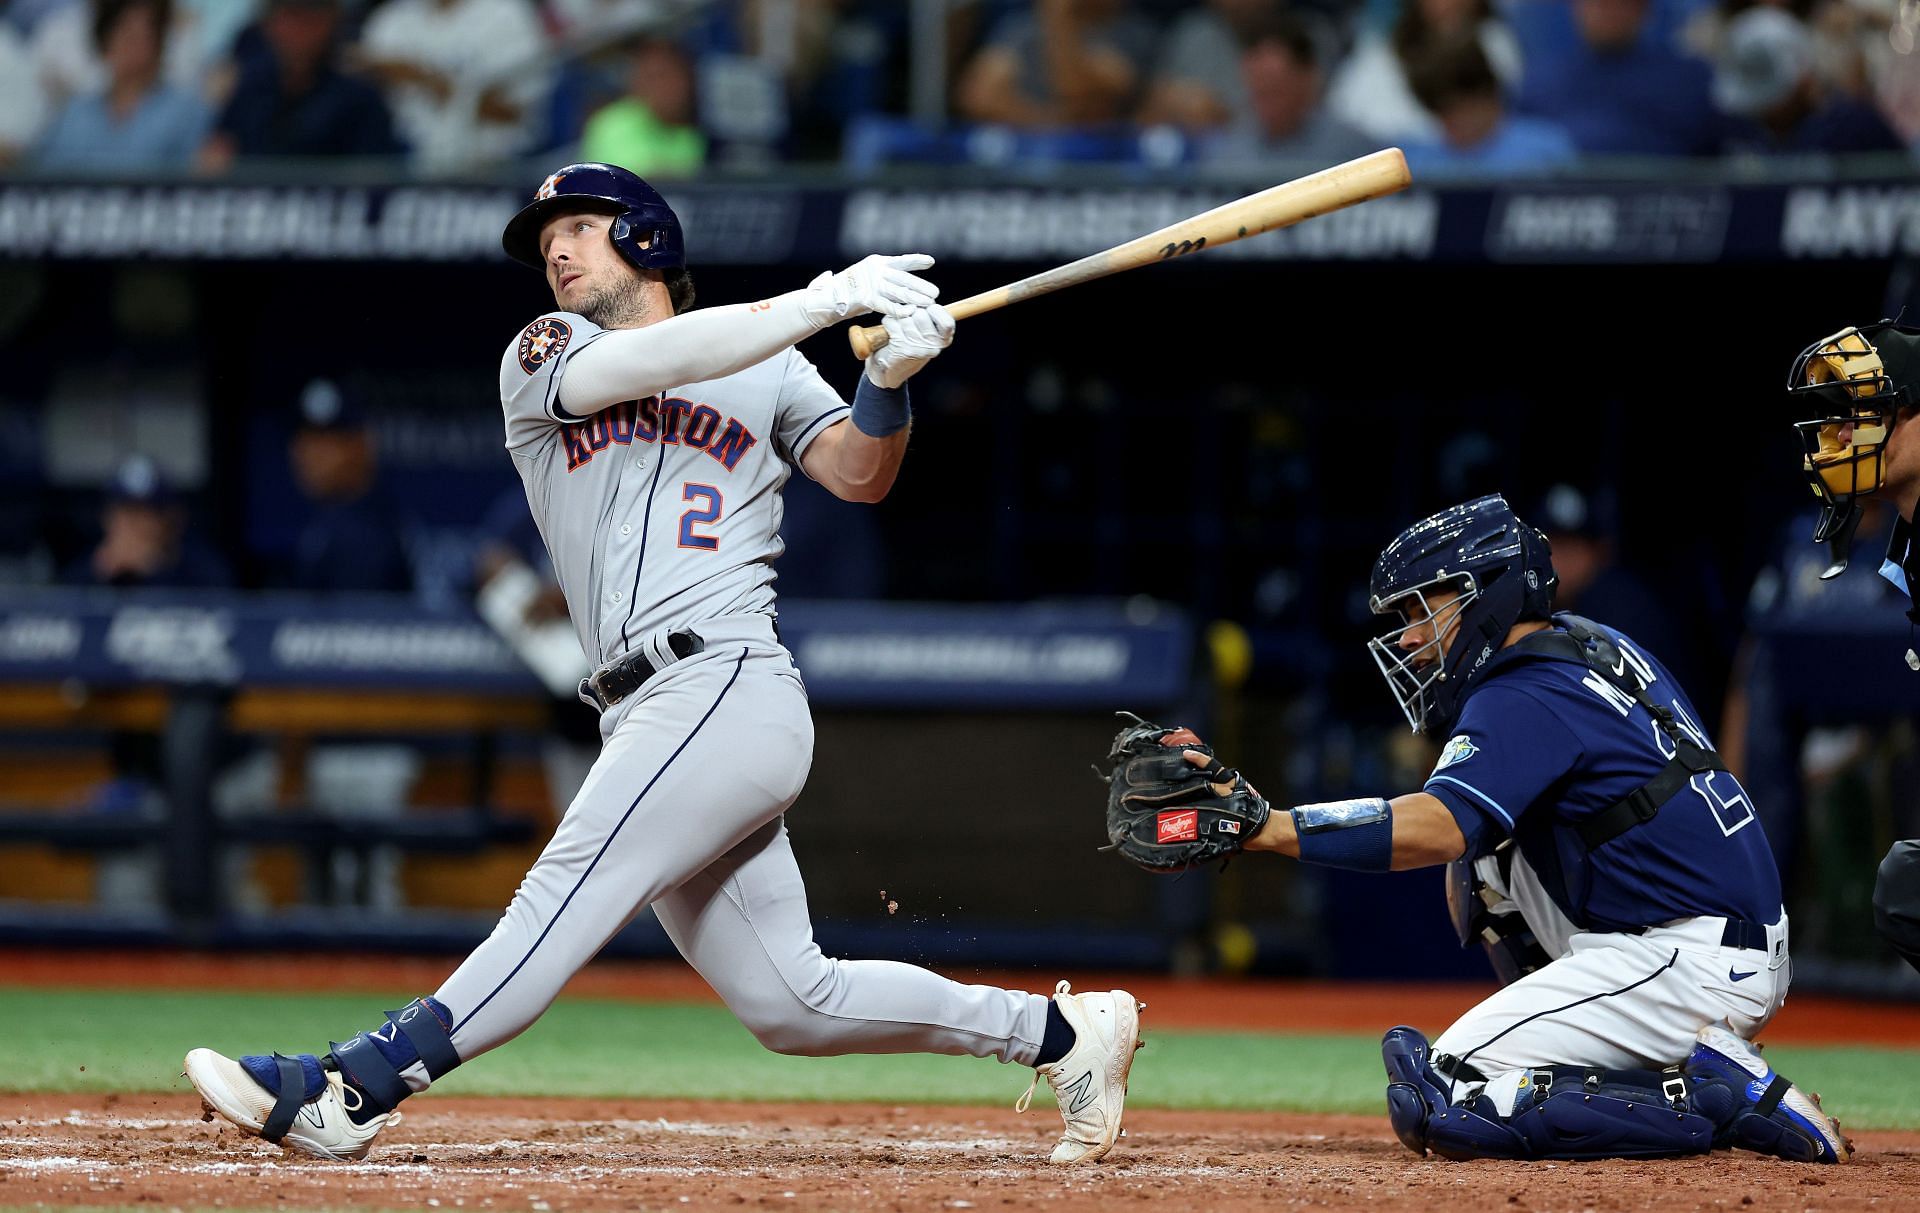 Alex Bregman #2 of the Houston Astros bits in the sixth inning during a game against the Tampa Bay Rays